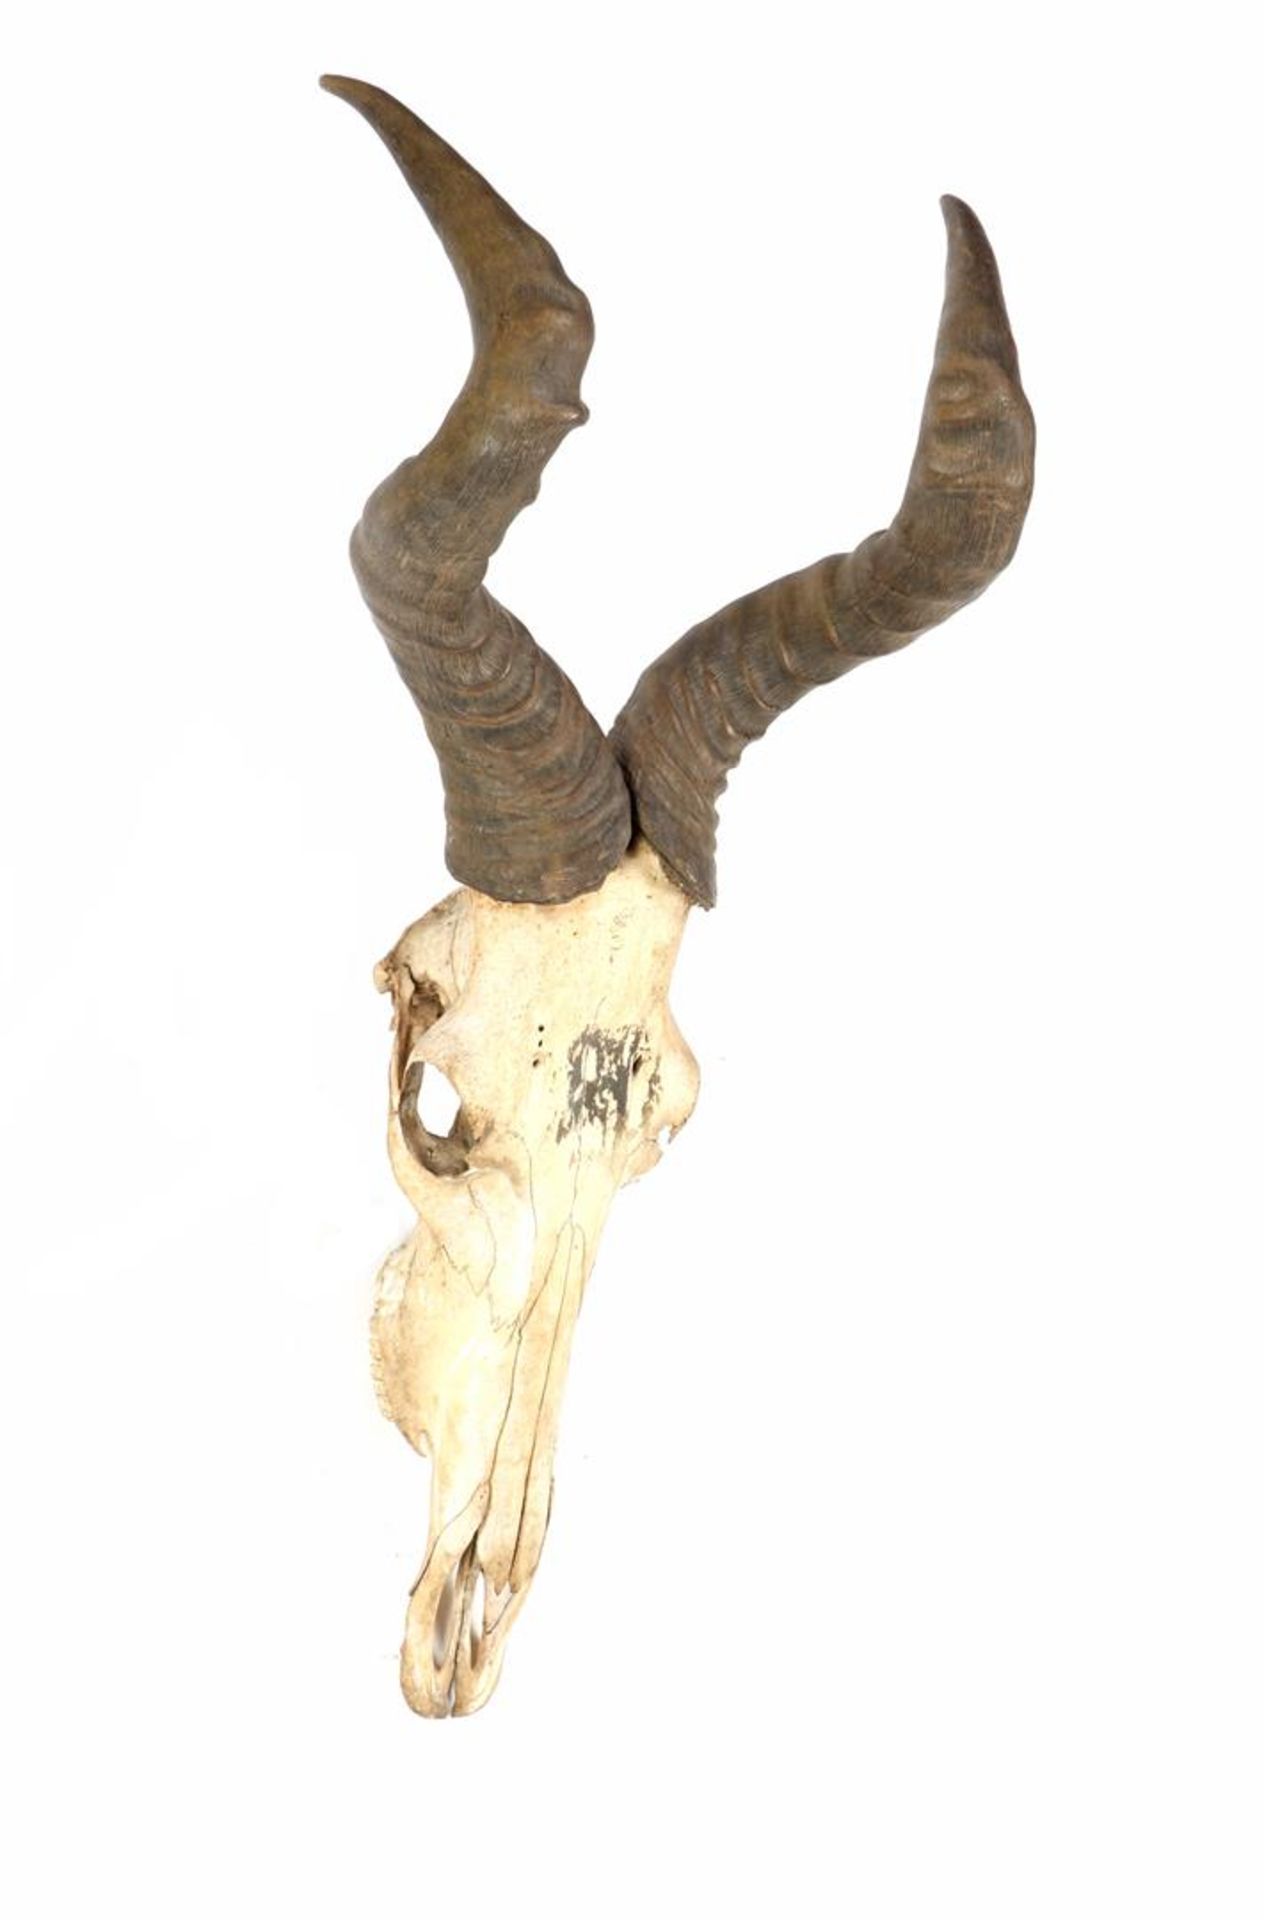 Skull with horns, presumably from a red hartebeest - Bild 2 aus 2